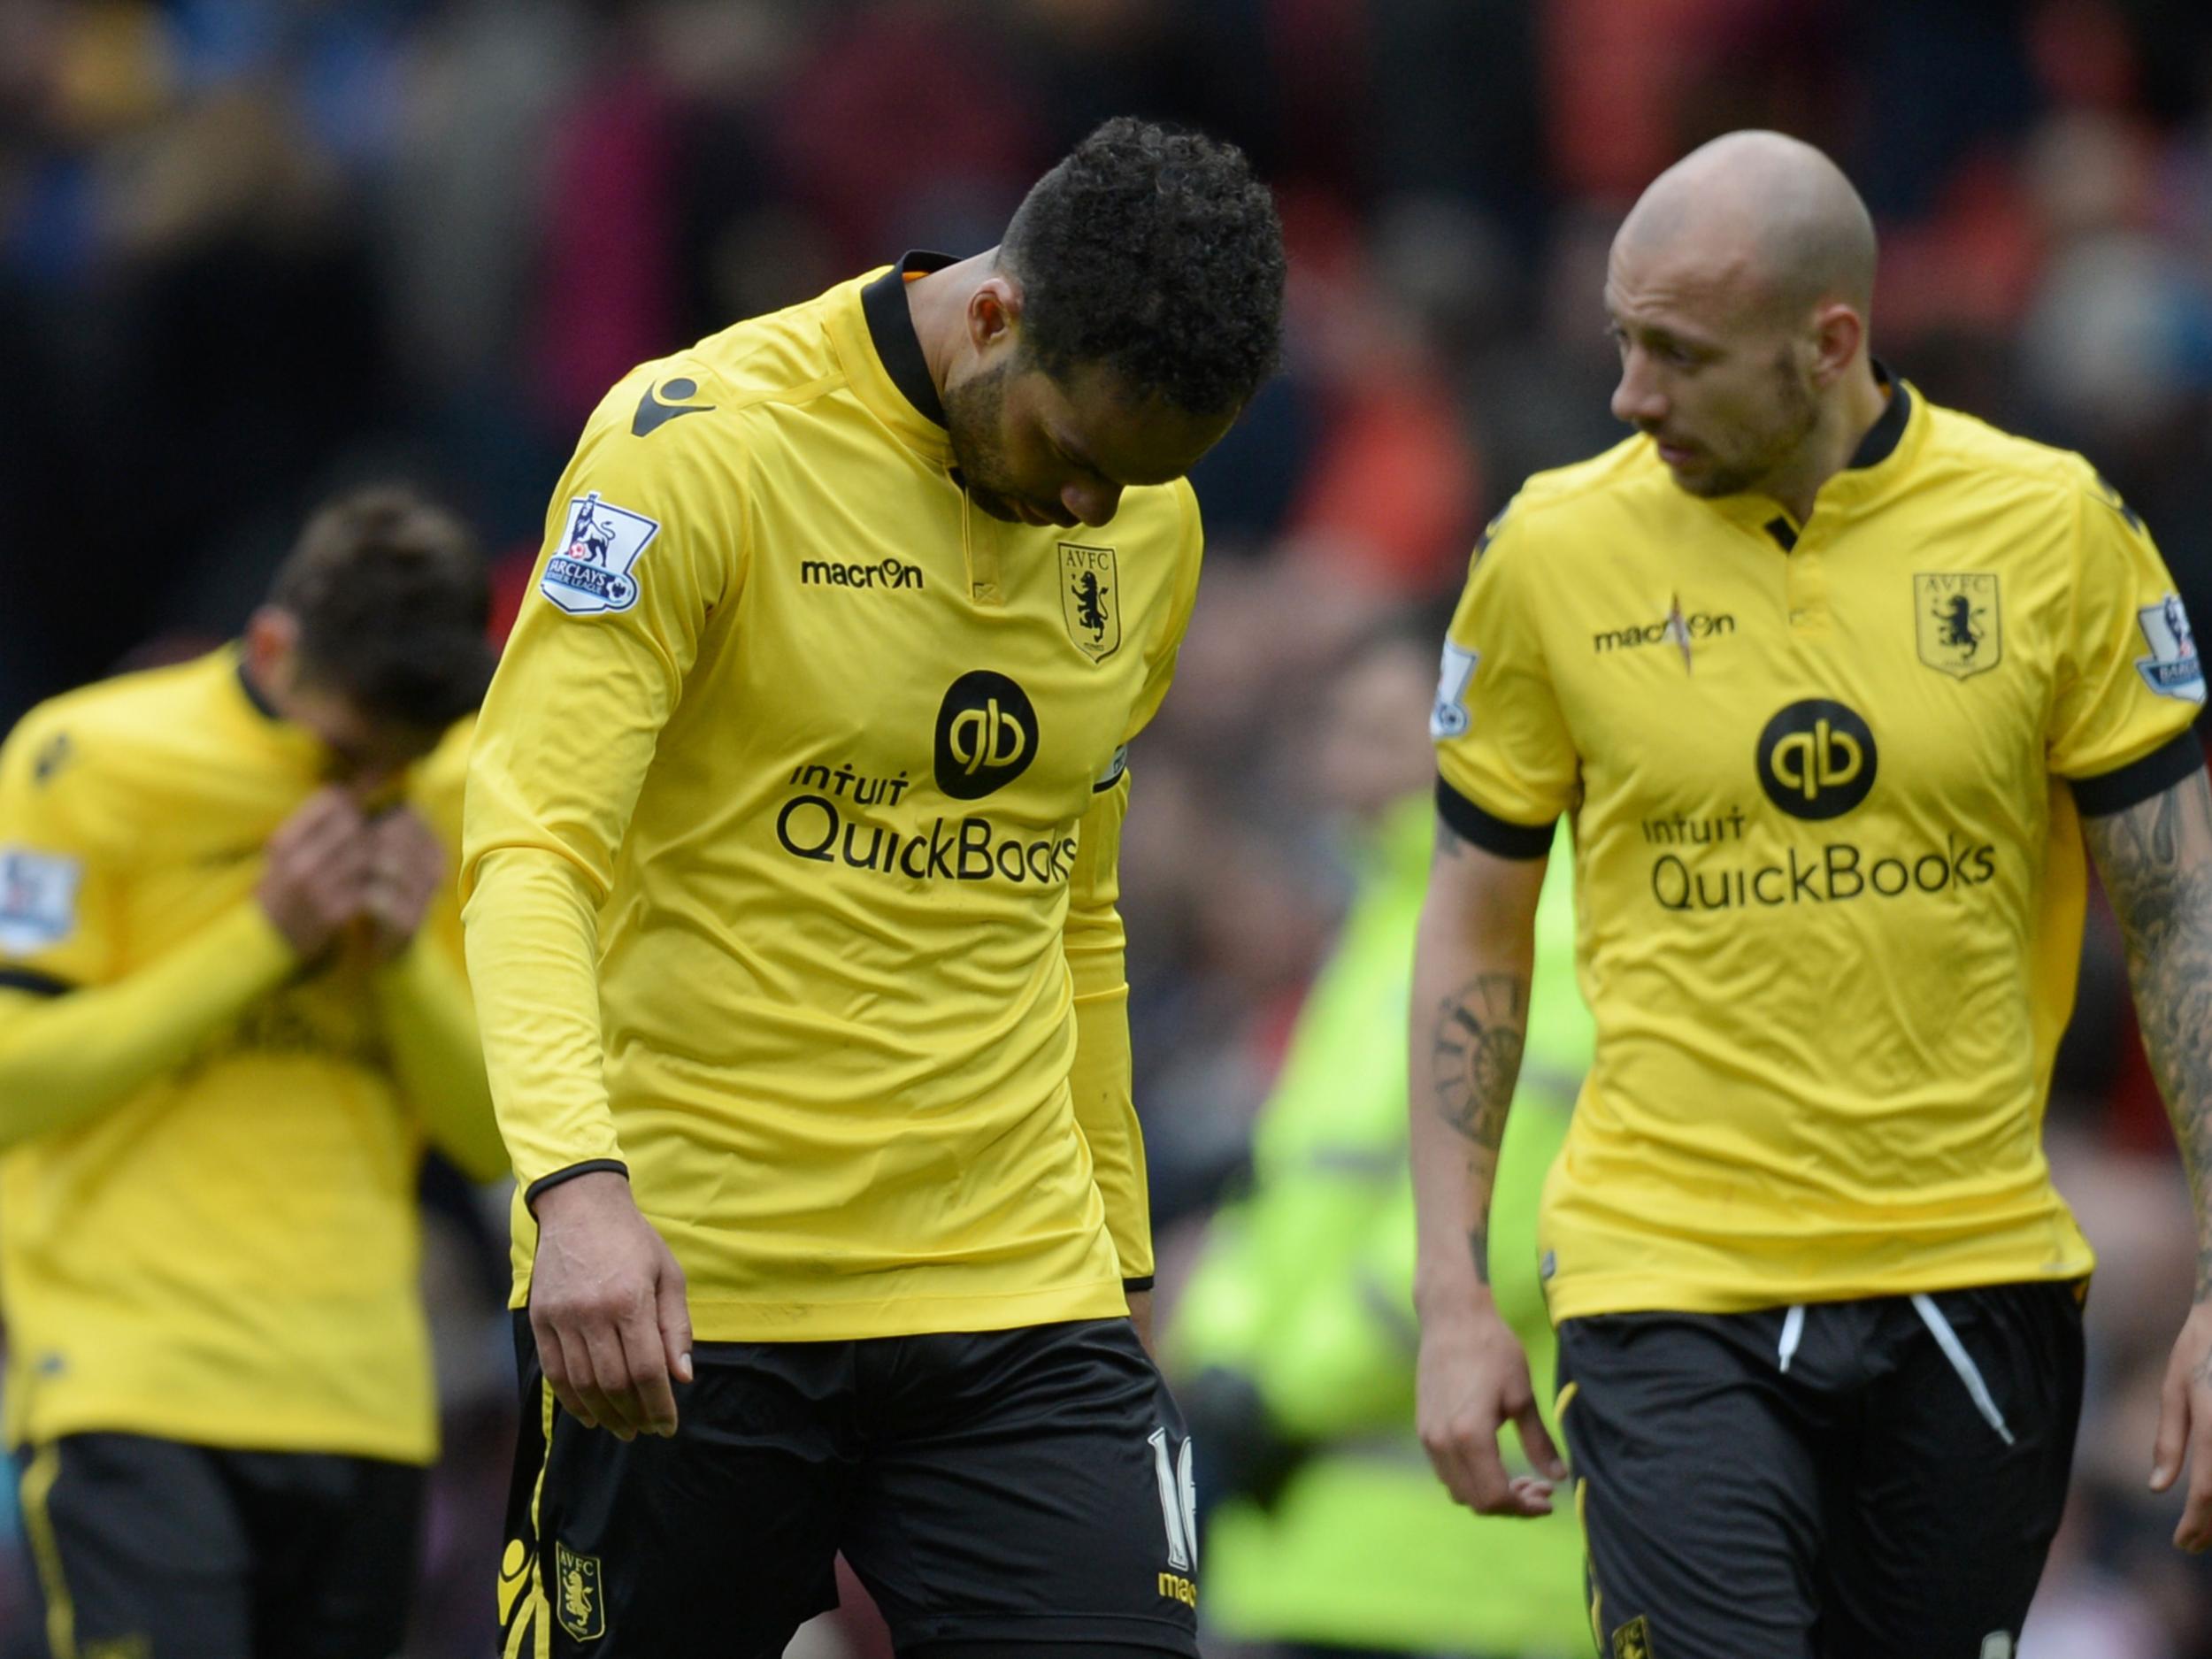 Aston Villa fans react to suffering relegation from the Premier League